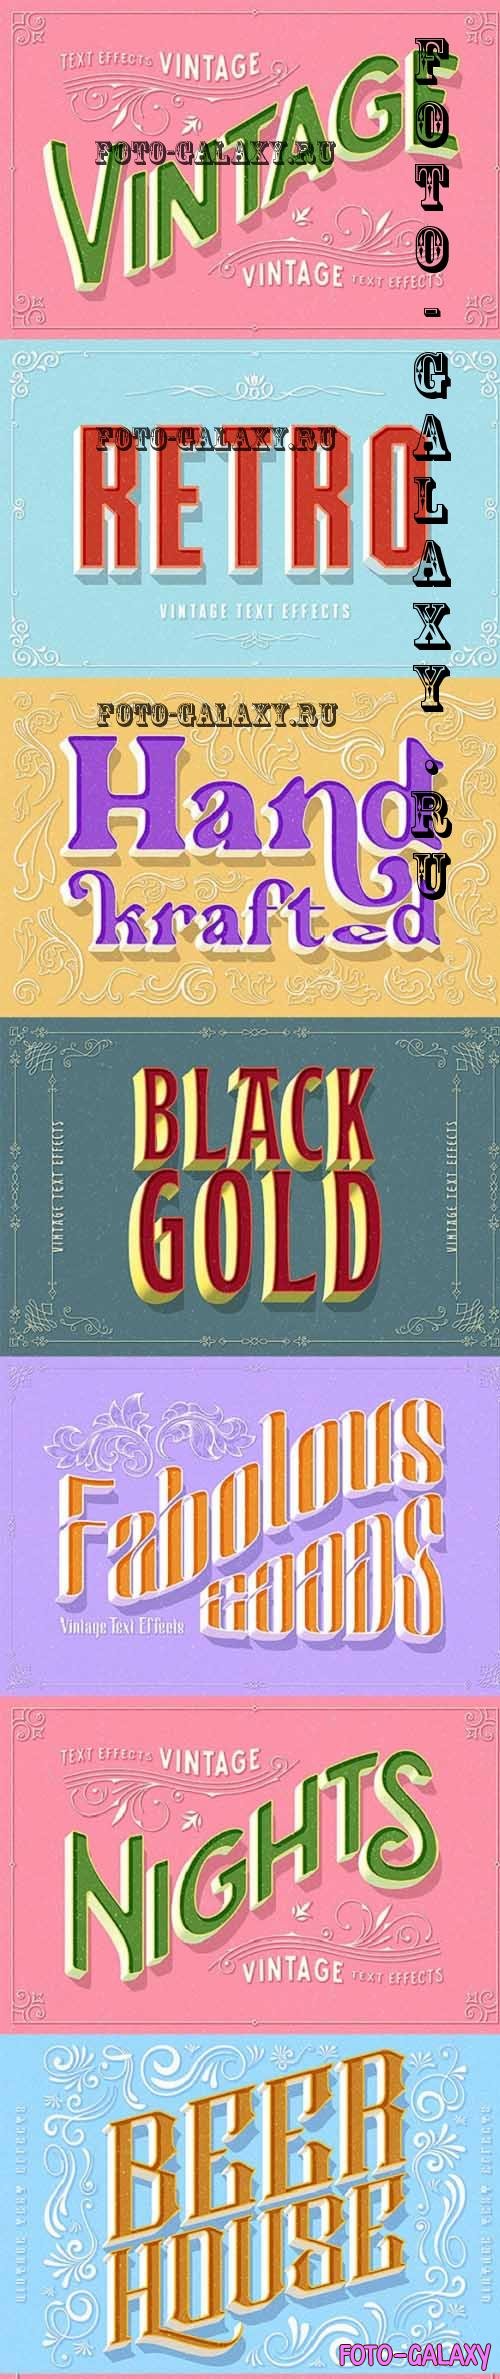 Graphicriver - Vintage Text Effects - 36352513